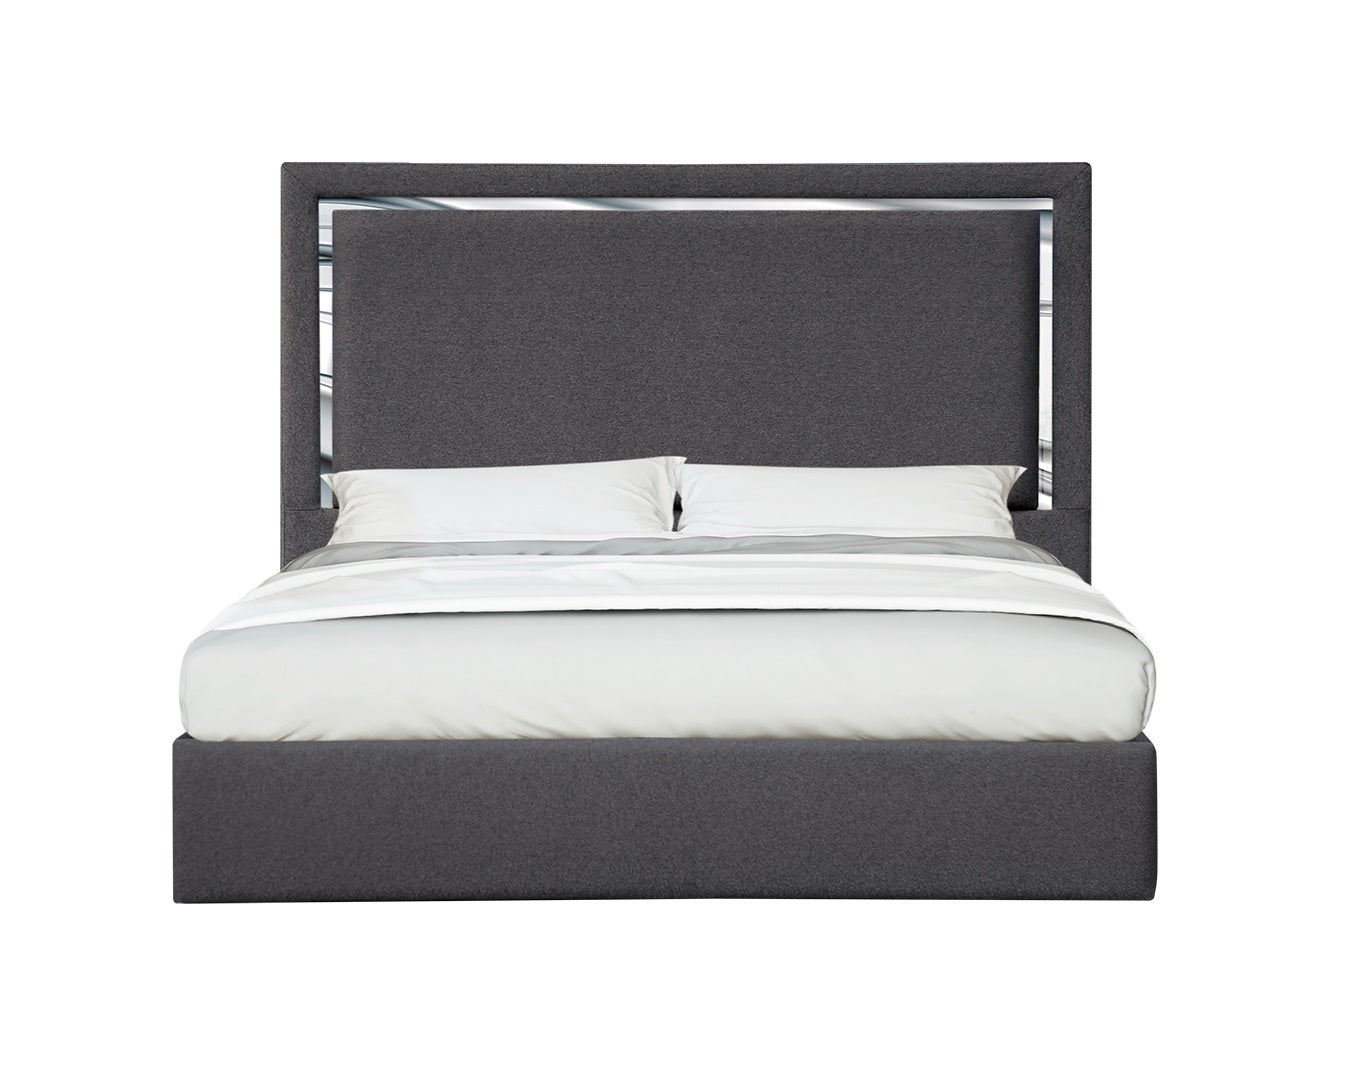 Monet King Bed Charcoal by JM